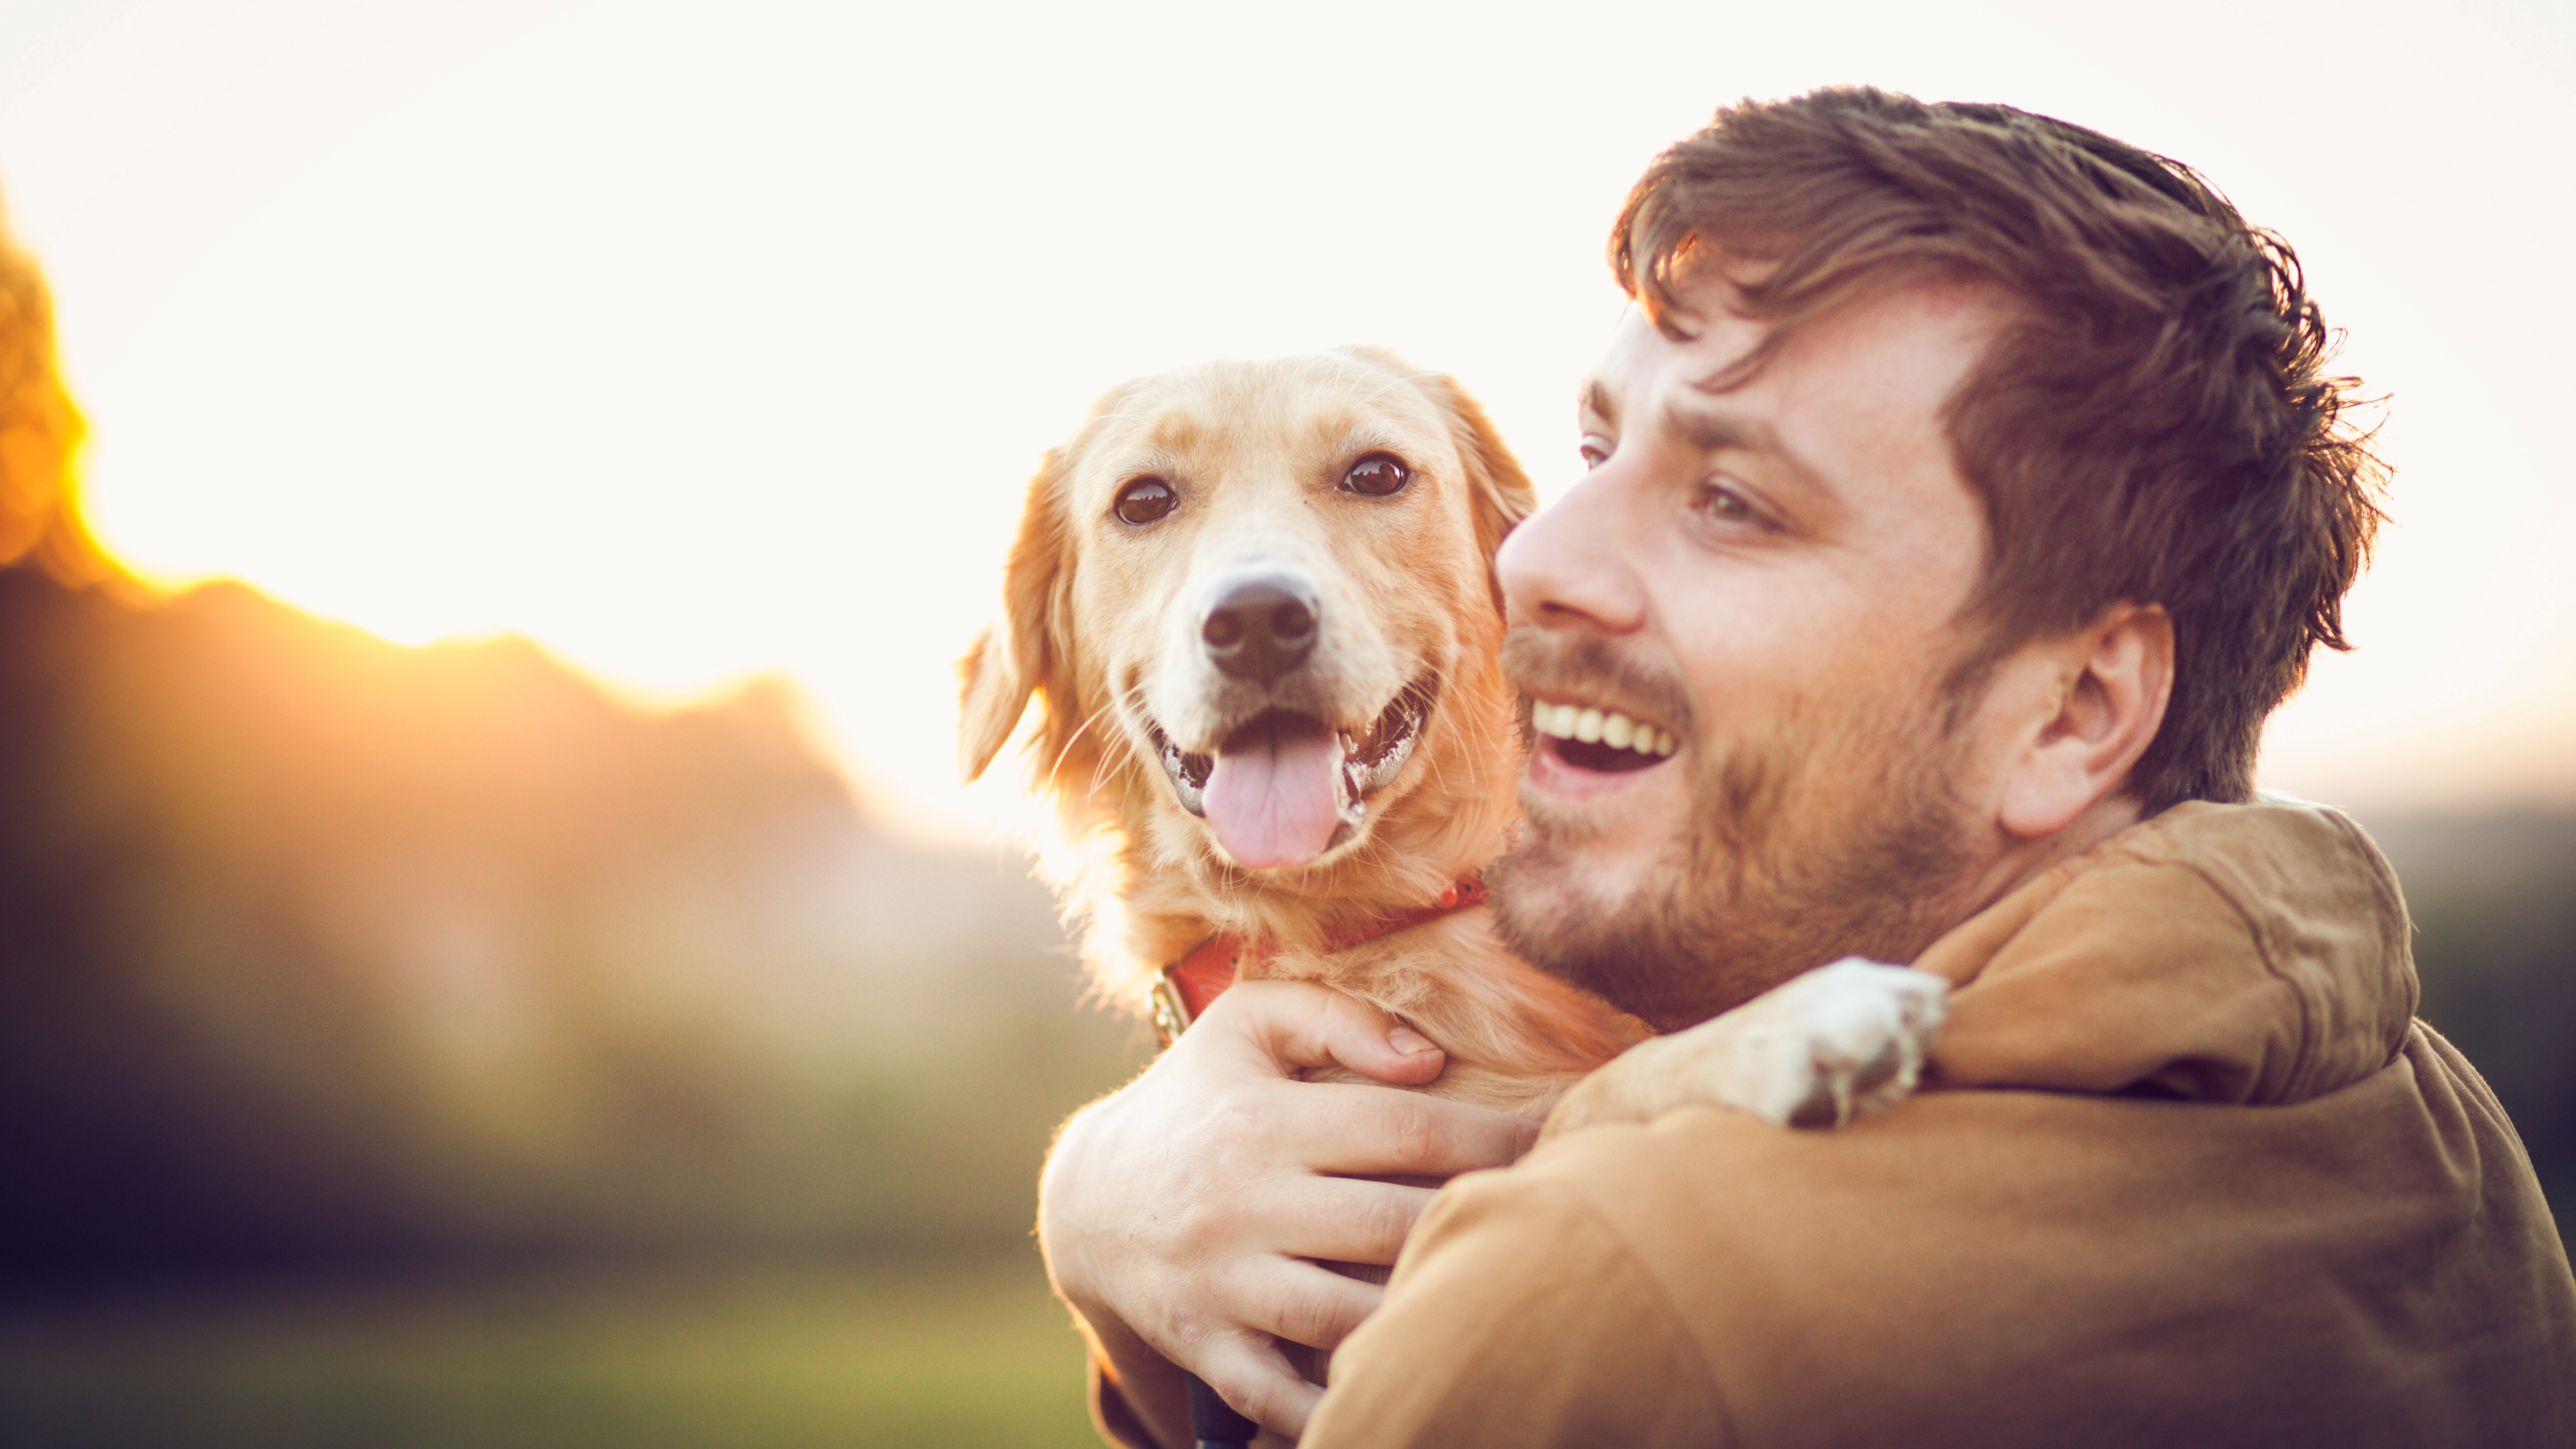 The one thing you should never do if you want a happy relationship with your dog